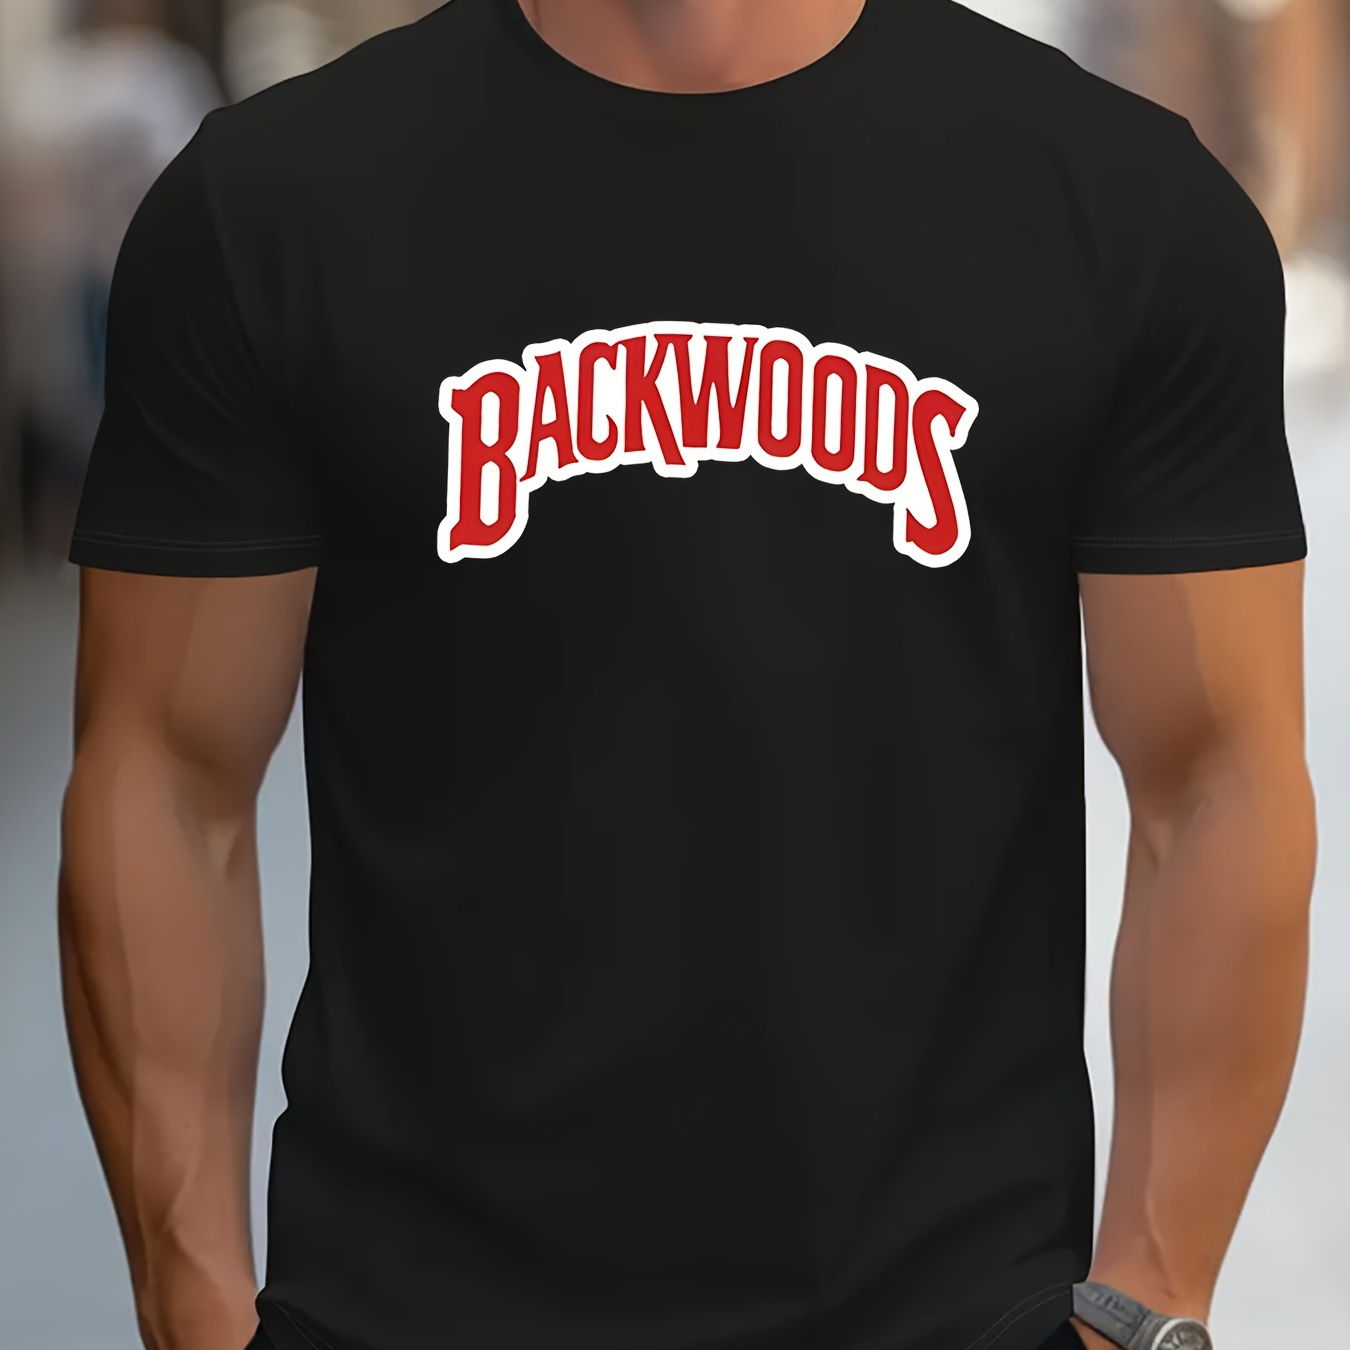 

Backwoods Letter Print Men's T-shirt, Crew Neck Short Sleeve Tees For Summer, Casual Comfortable Versatile Top For Outdoor Activities, As Gifts